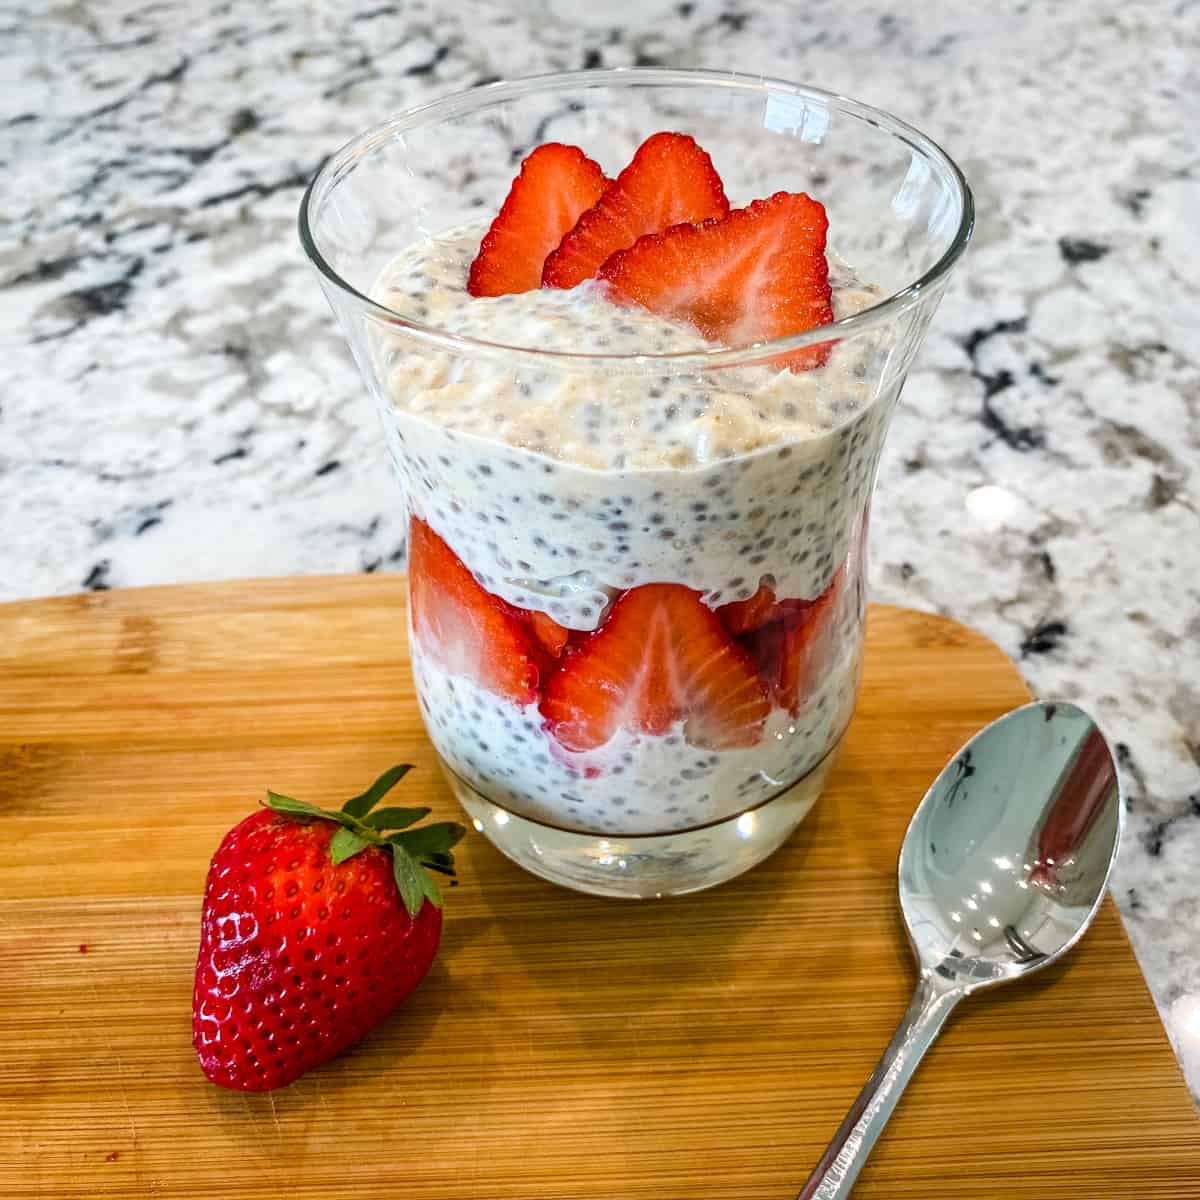 Refrigerator oats are layered with sliced strawberries in a clear glass.